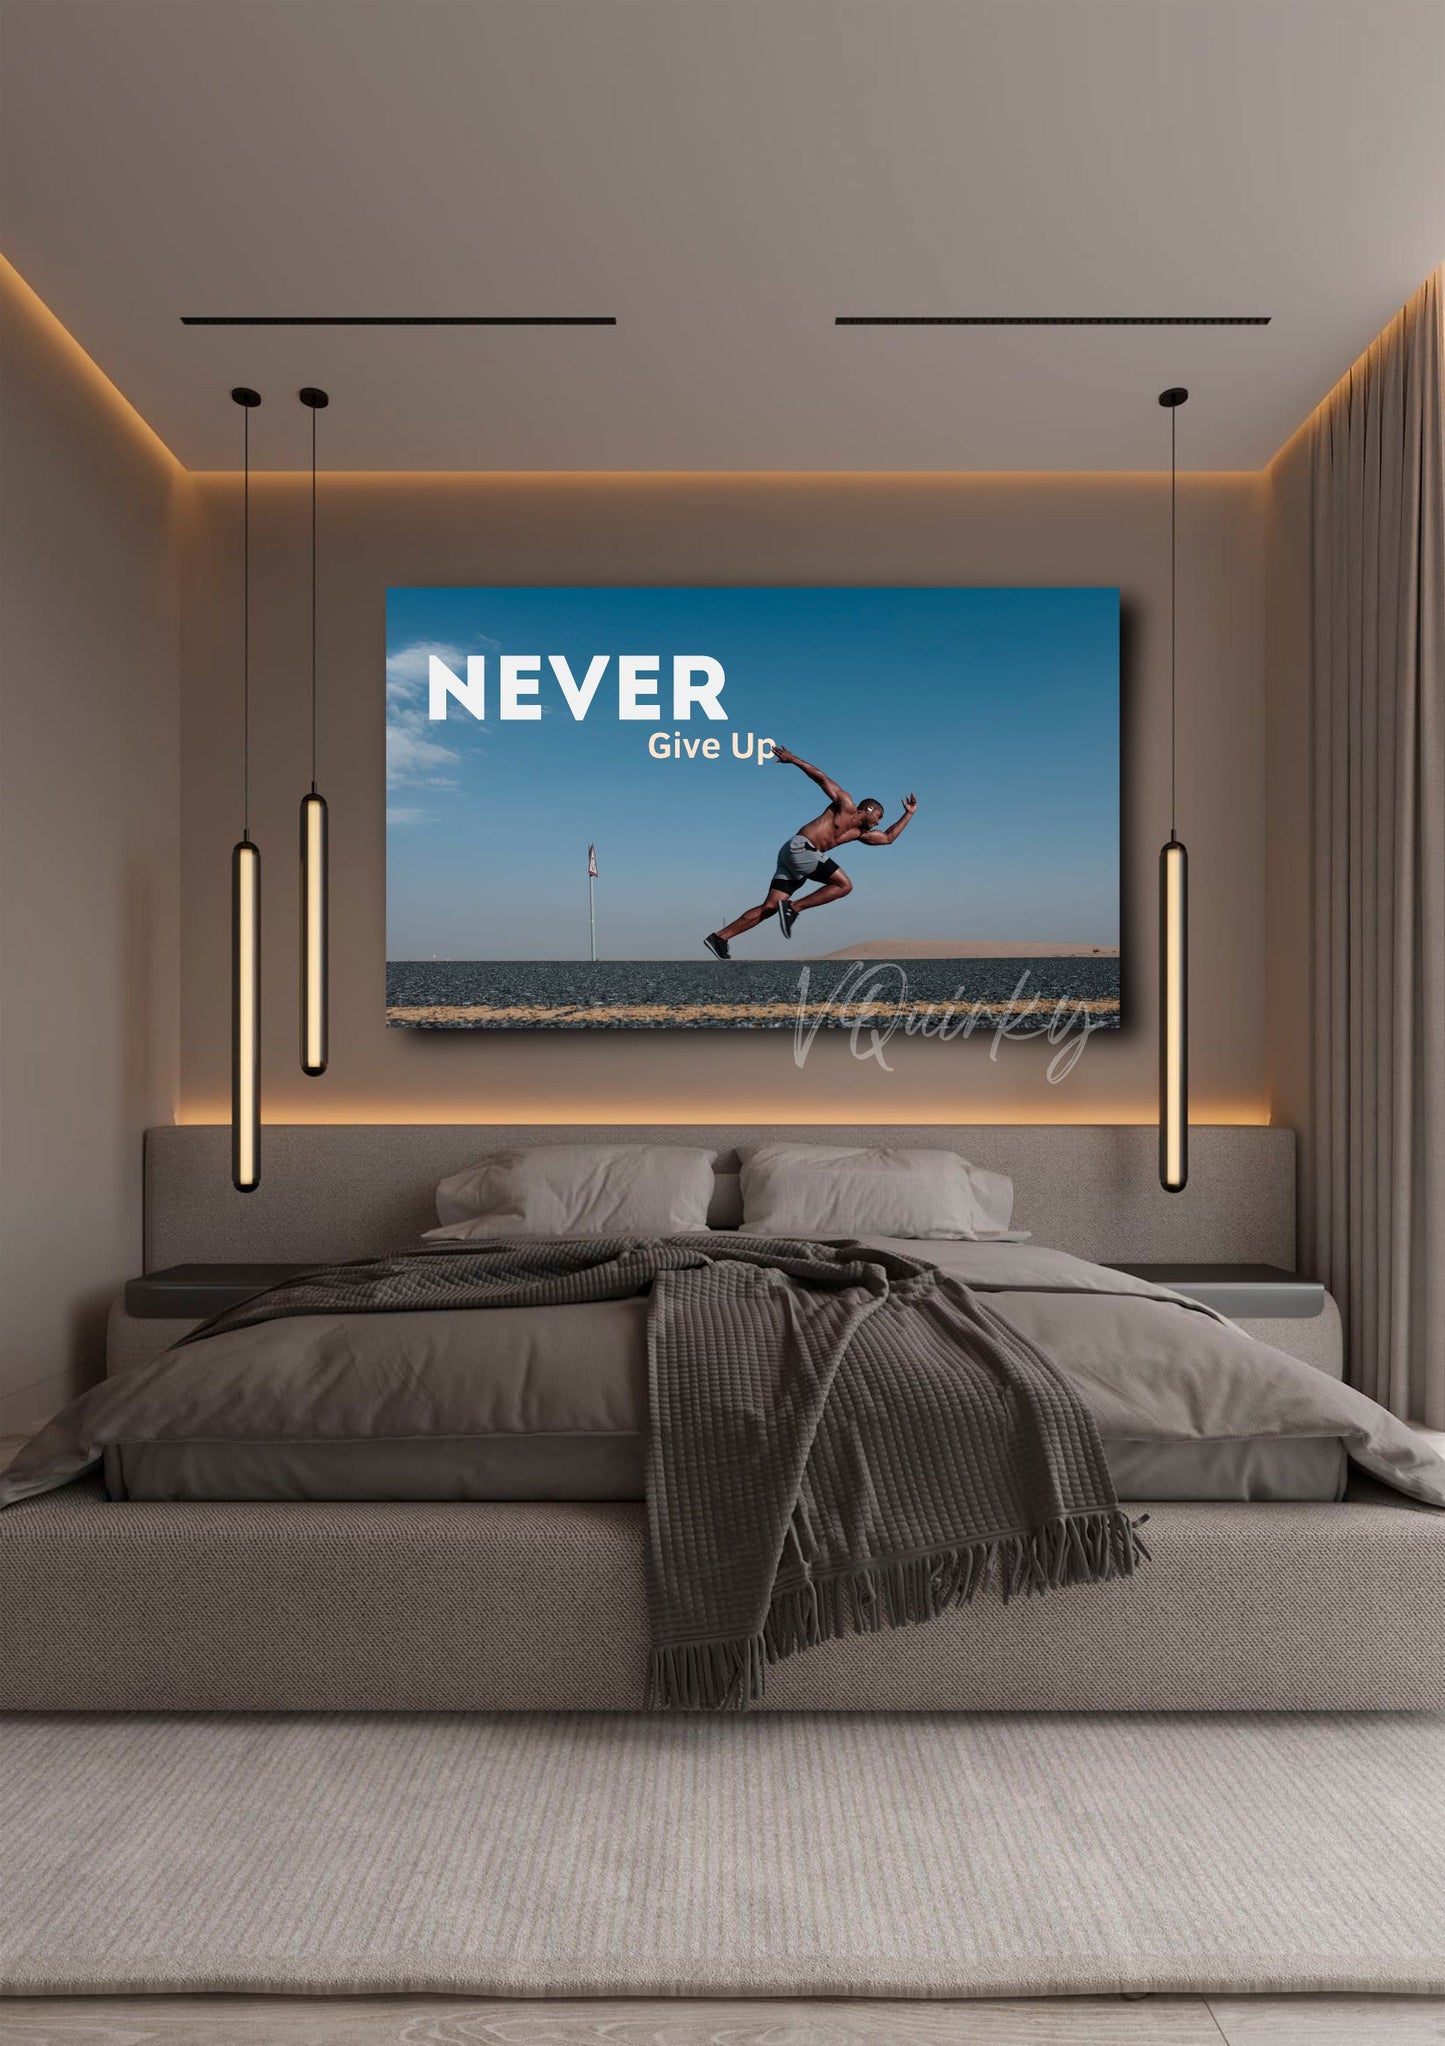 Never Give Up Canvas Painting